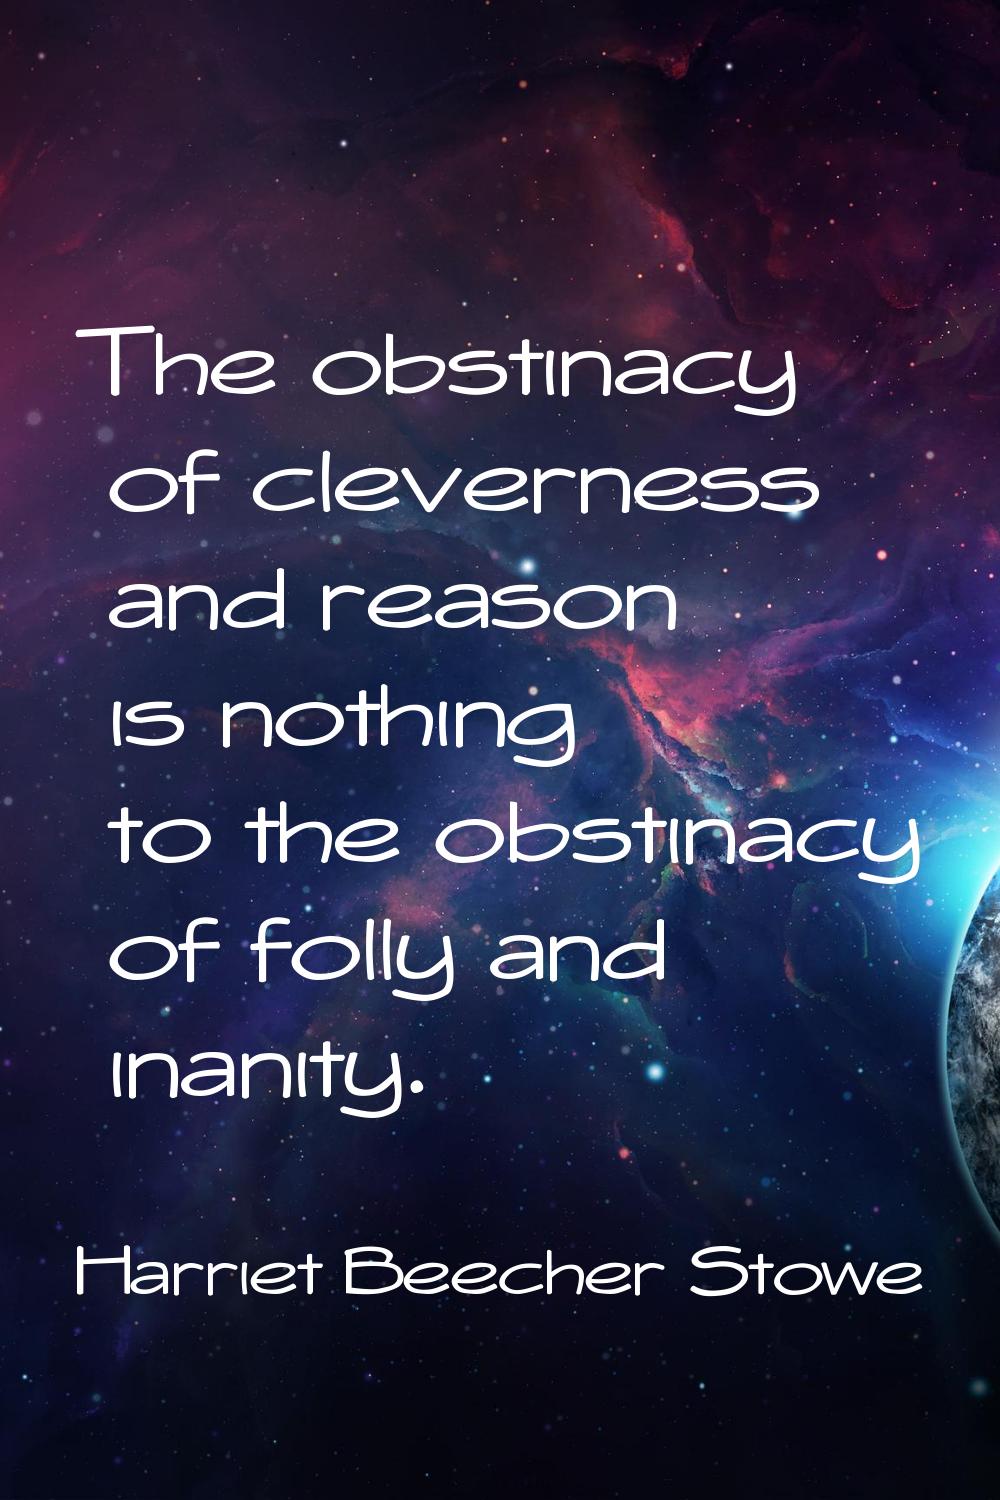 The obstinacy of cleverness and reason is nothing to the obstinacy of folly and inanity.